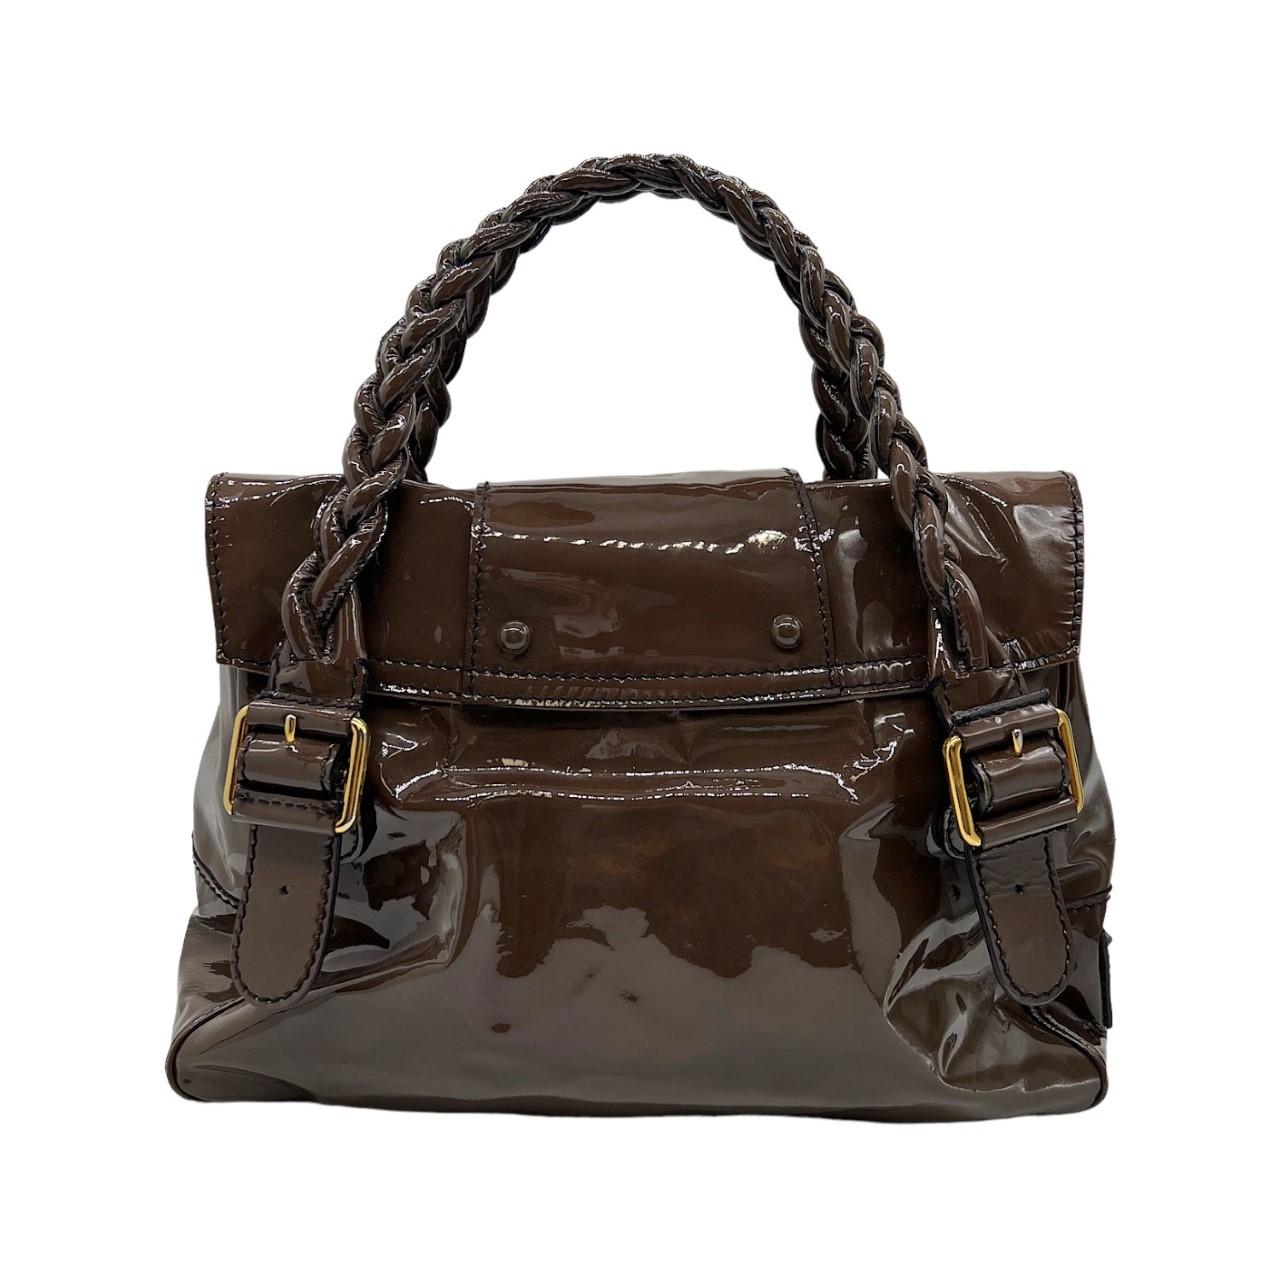 We are offering this stylish Valentino handbag. It is finely crafted of brown patent leather with black contrast stitching around the edges. The bag features braided top handles, frontal pockets, polished brass hardware and a frontal flap. This